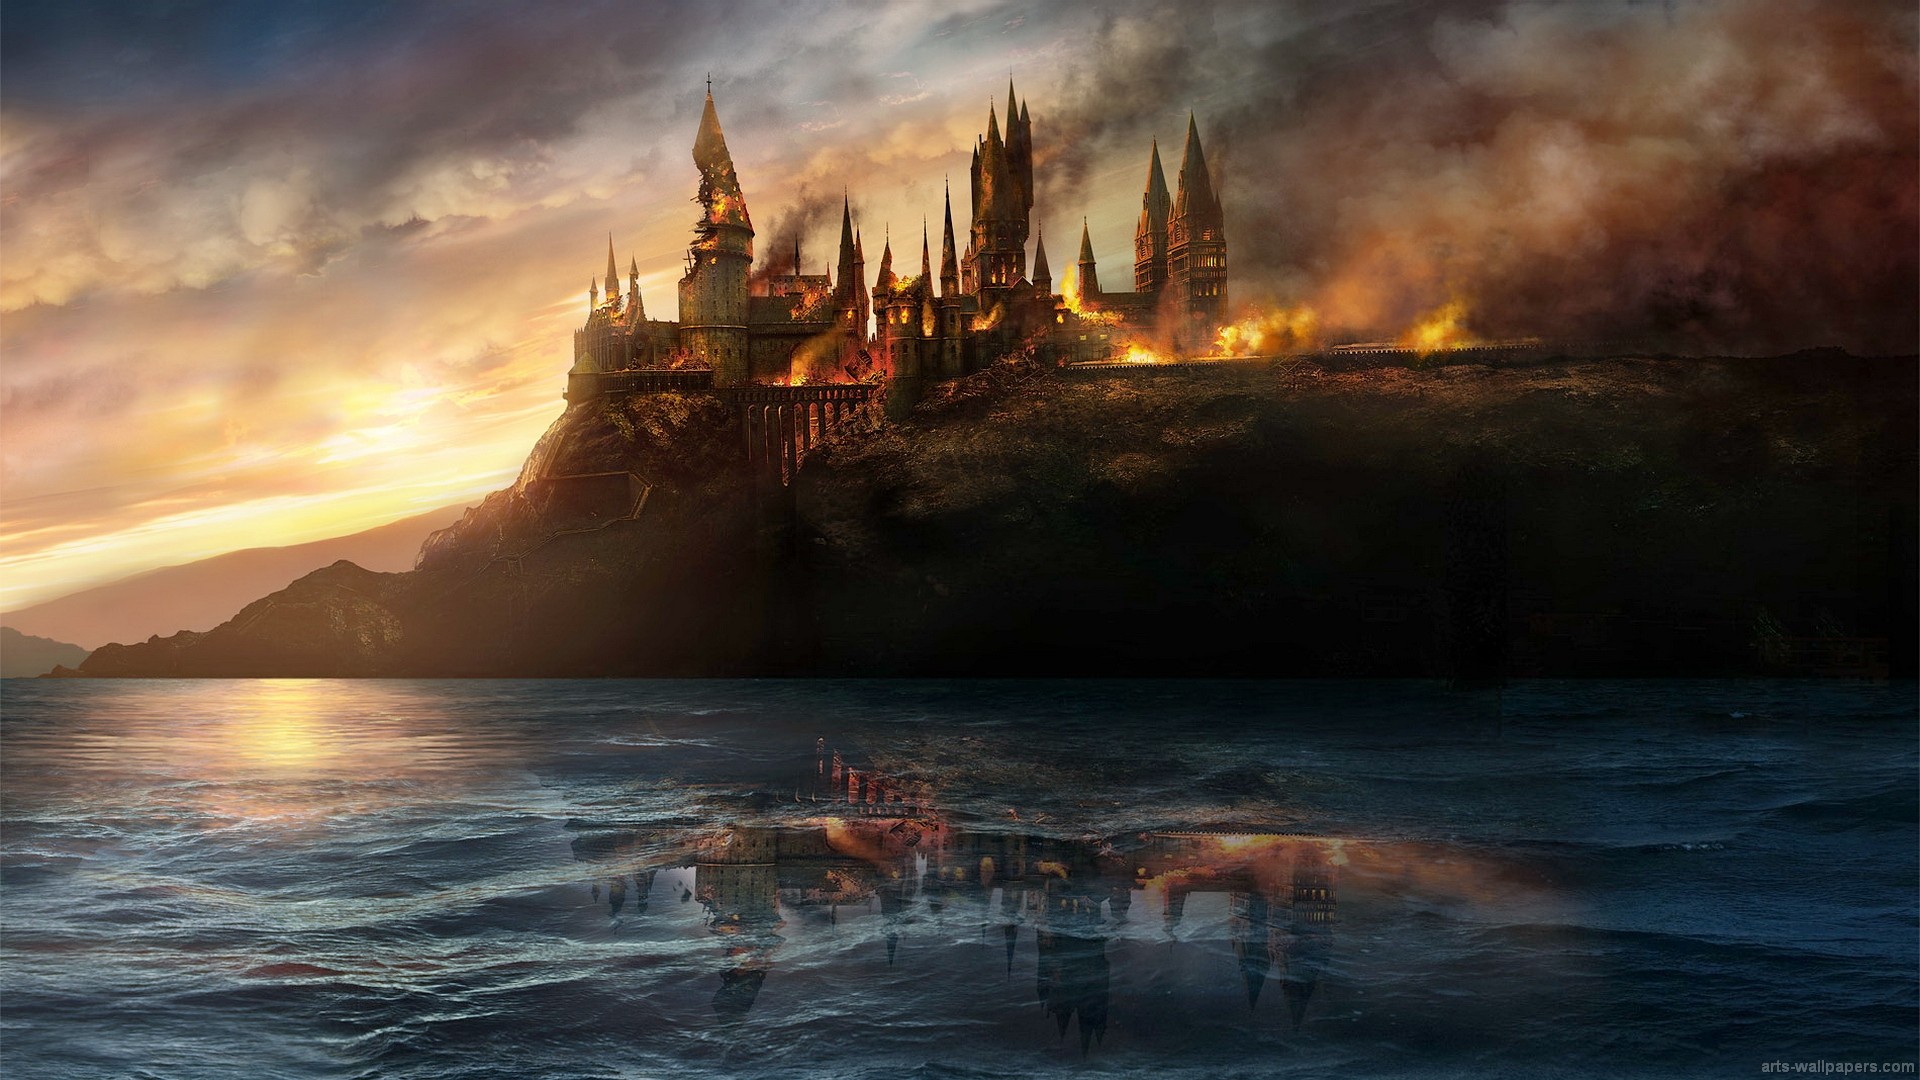 General 1920x1080 Harry Potter Hogwarts movies fire burning reflection